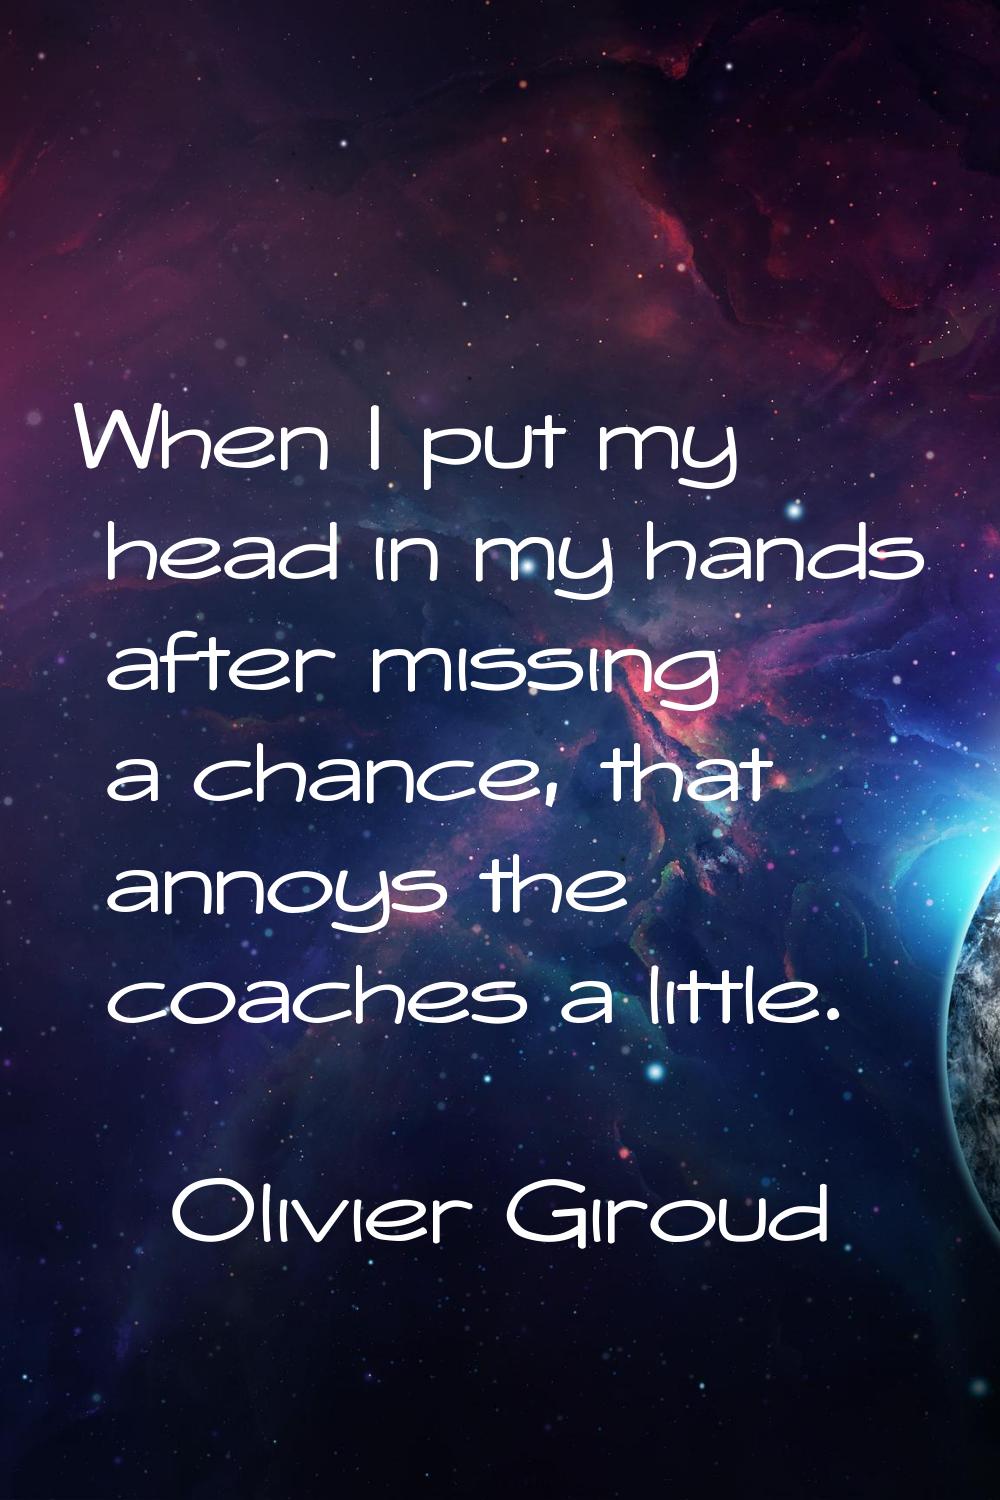 When I put my head in my hands after missing a chance, that annoys the coaches a little.